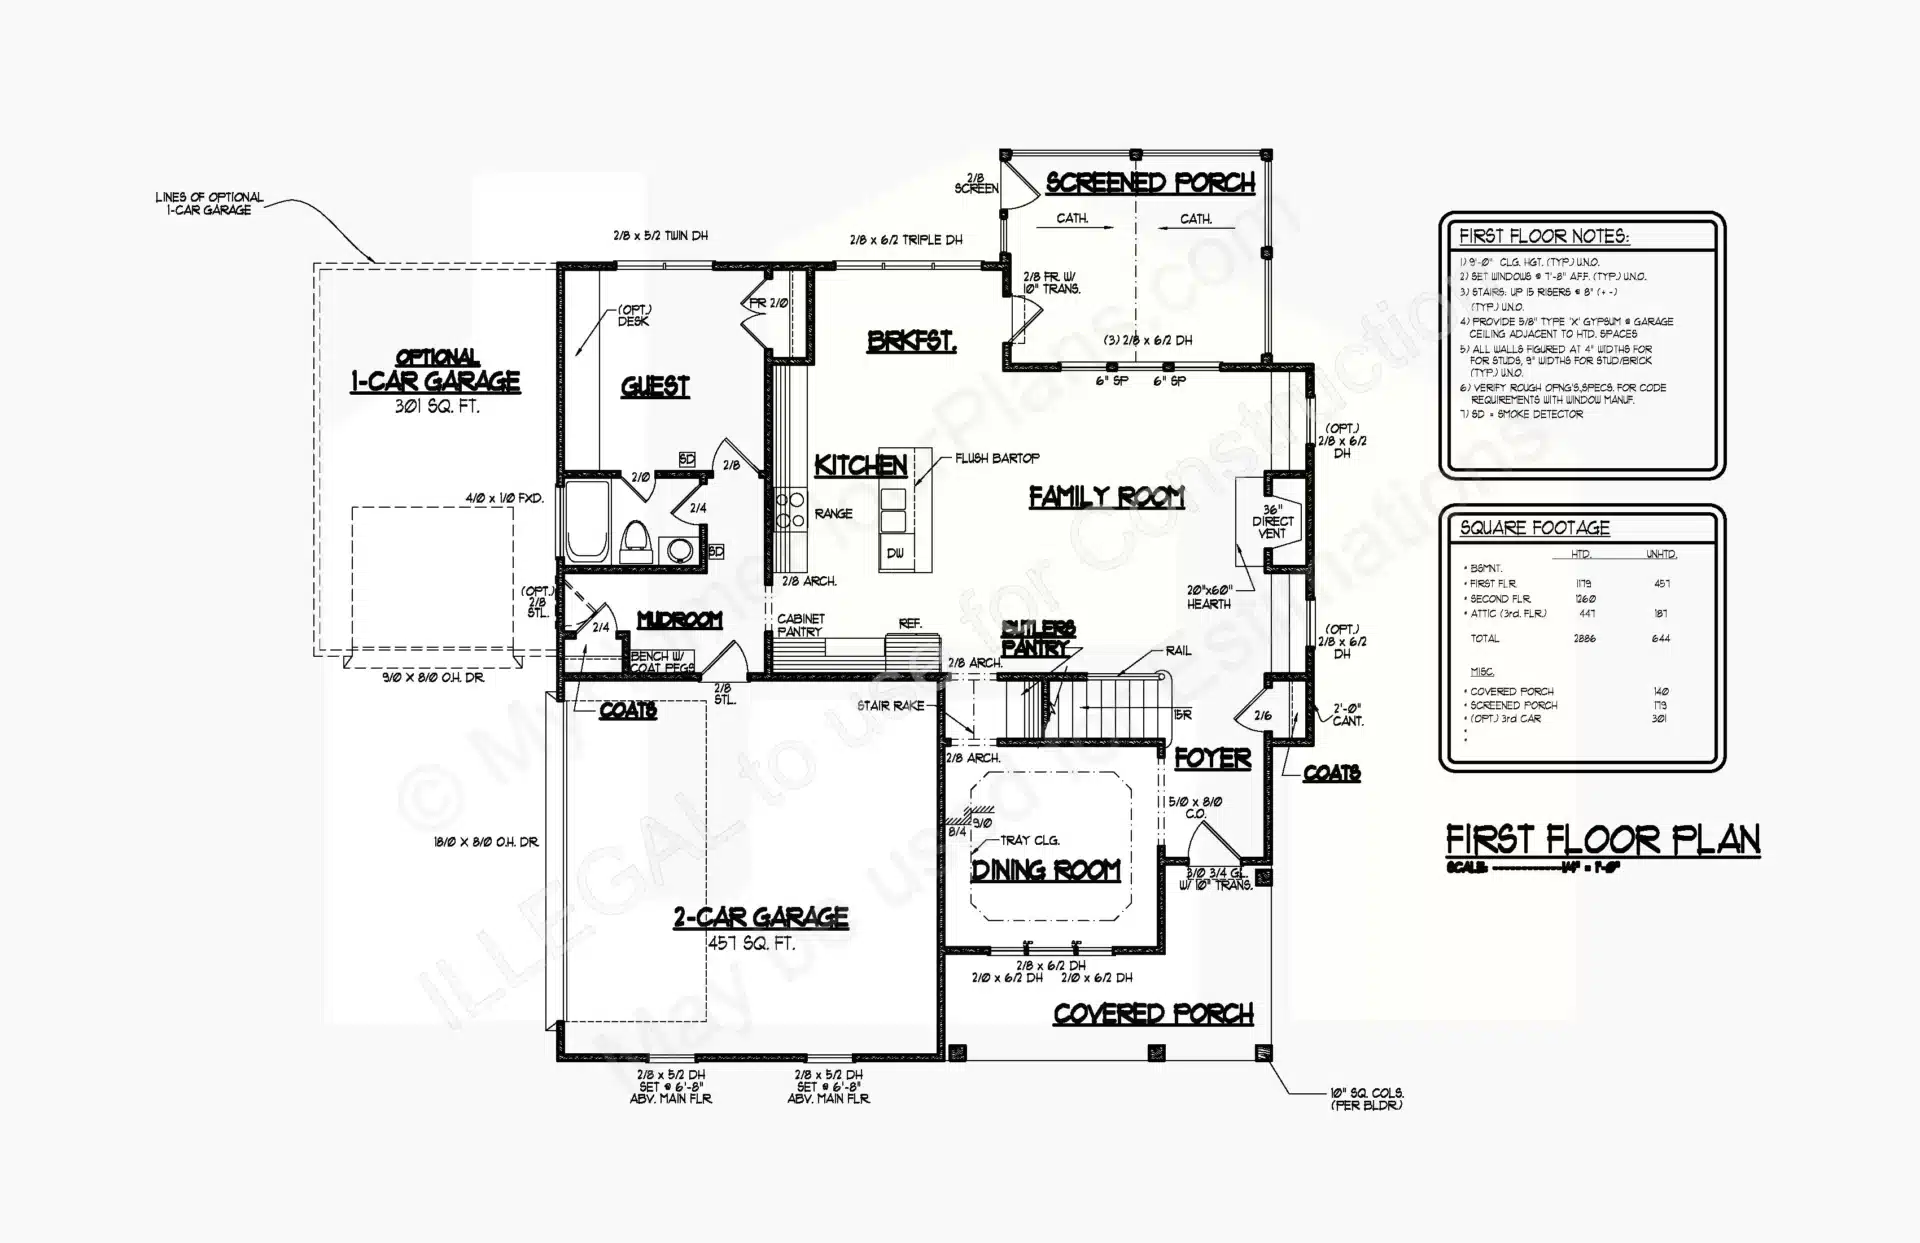 13-1790 my home floor plans_Page_06